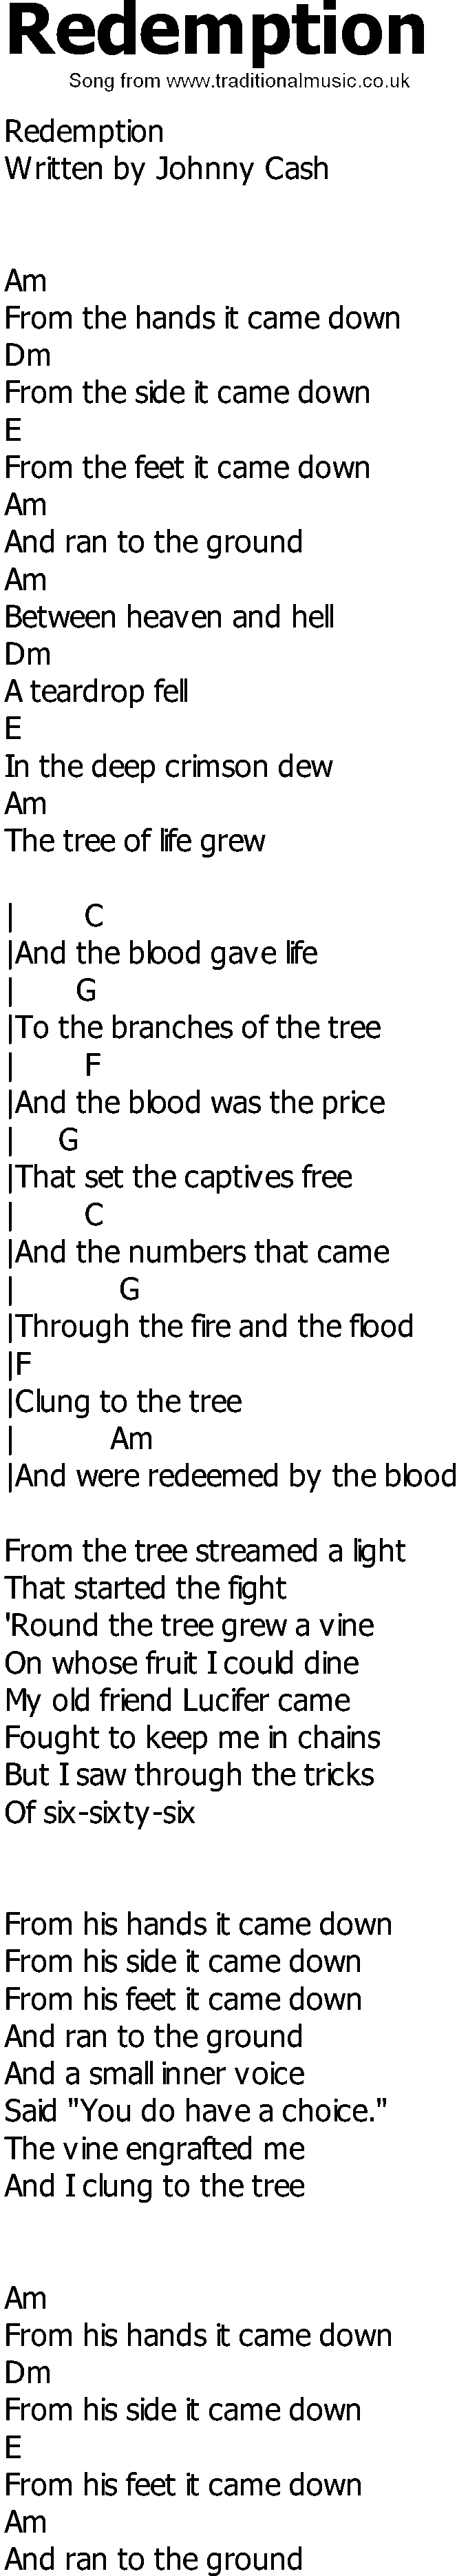 Old Country song lyrics with chords - Redemption